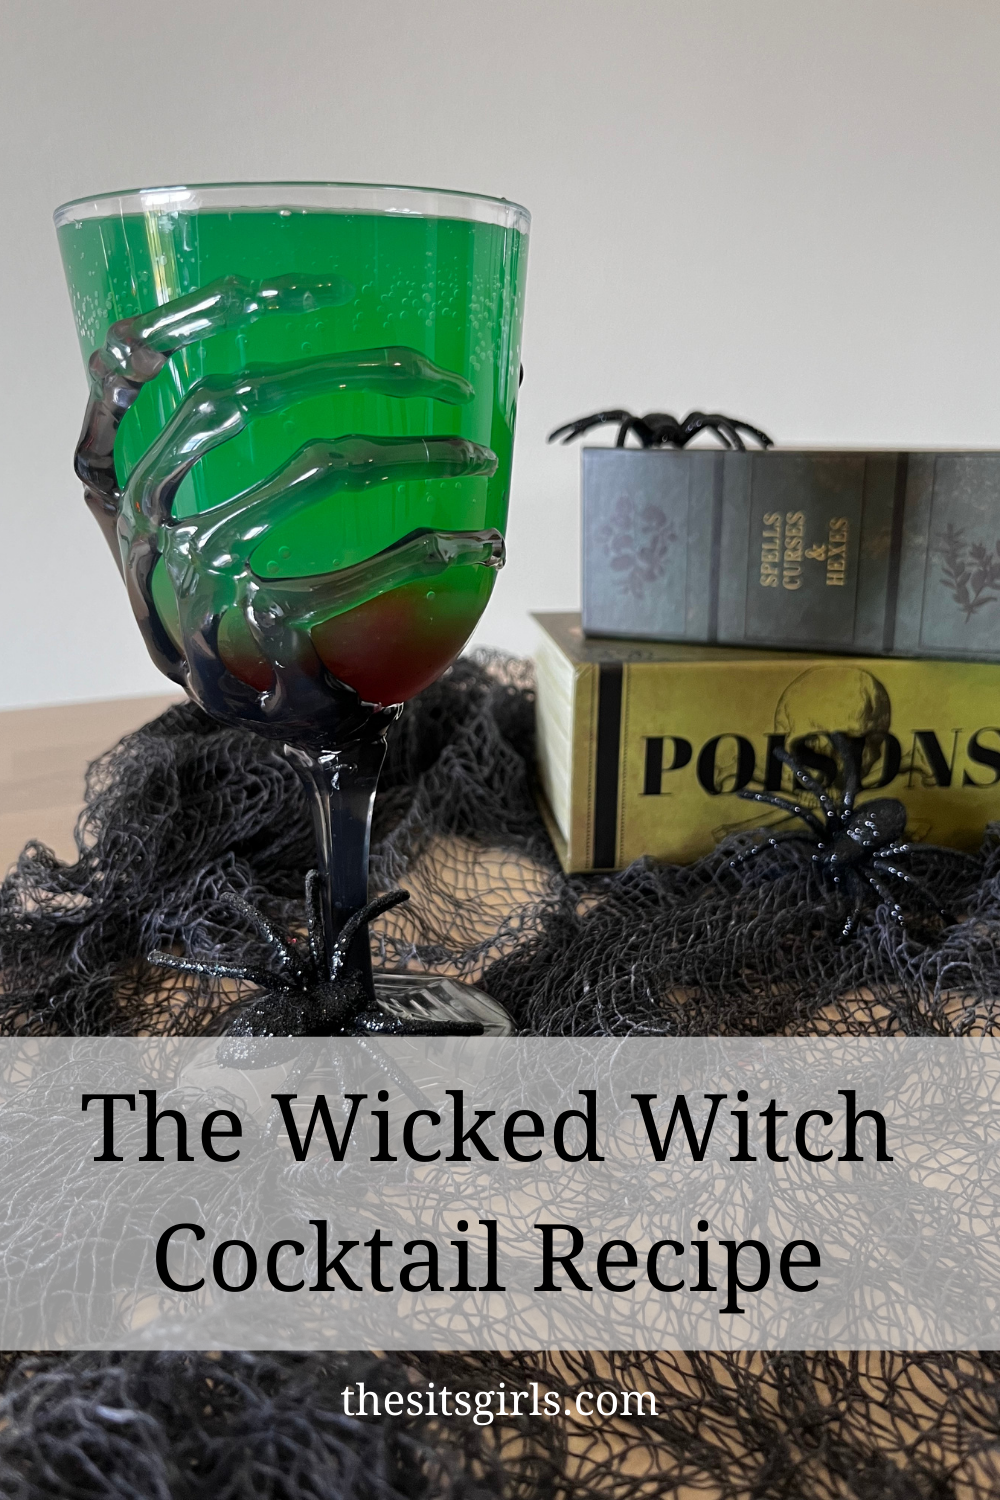 The Wicked Witch Cocktail Recipe with a photo of a green drink in a goblet with a spooky skeleton hand.